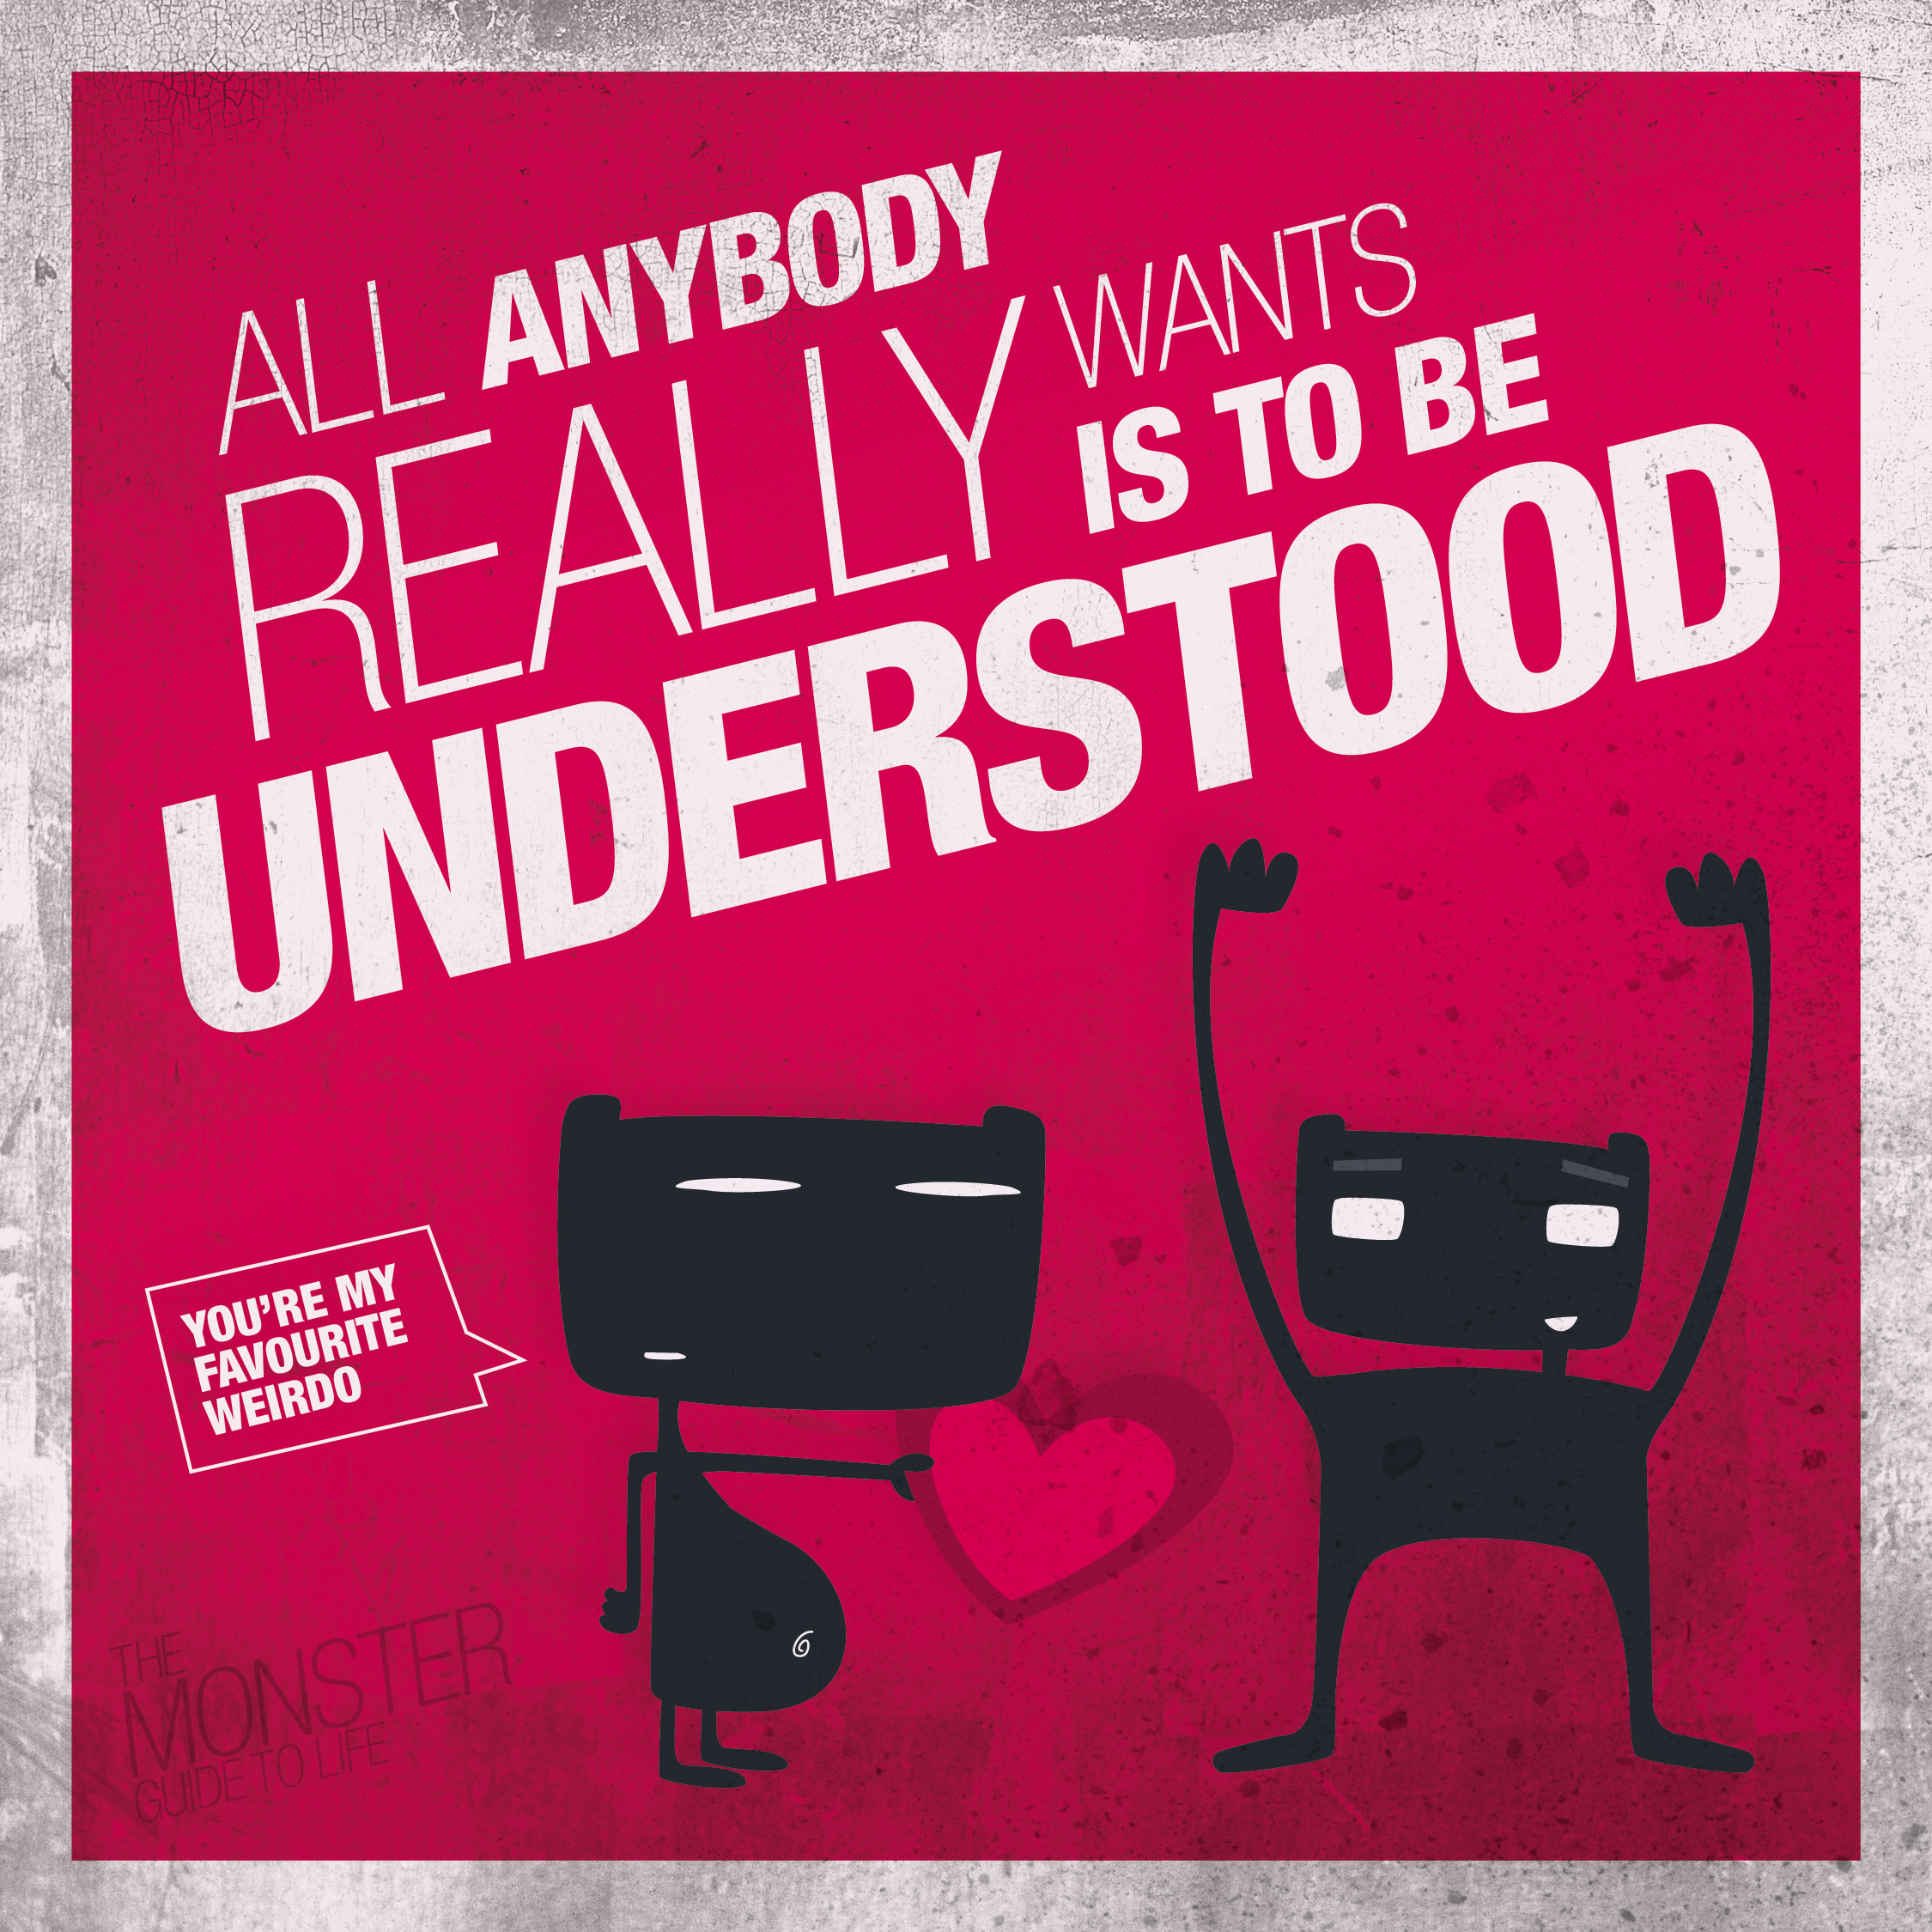 All anybody really wants is to be understood